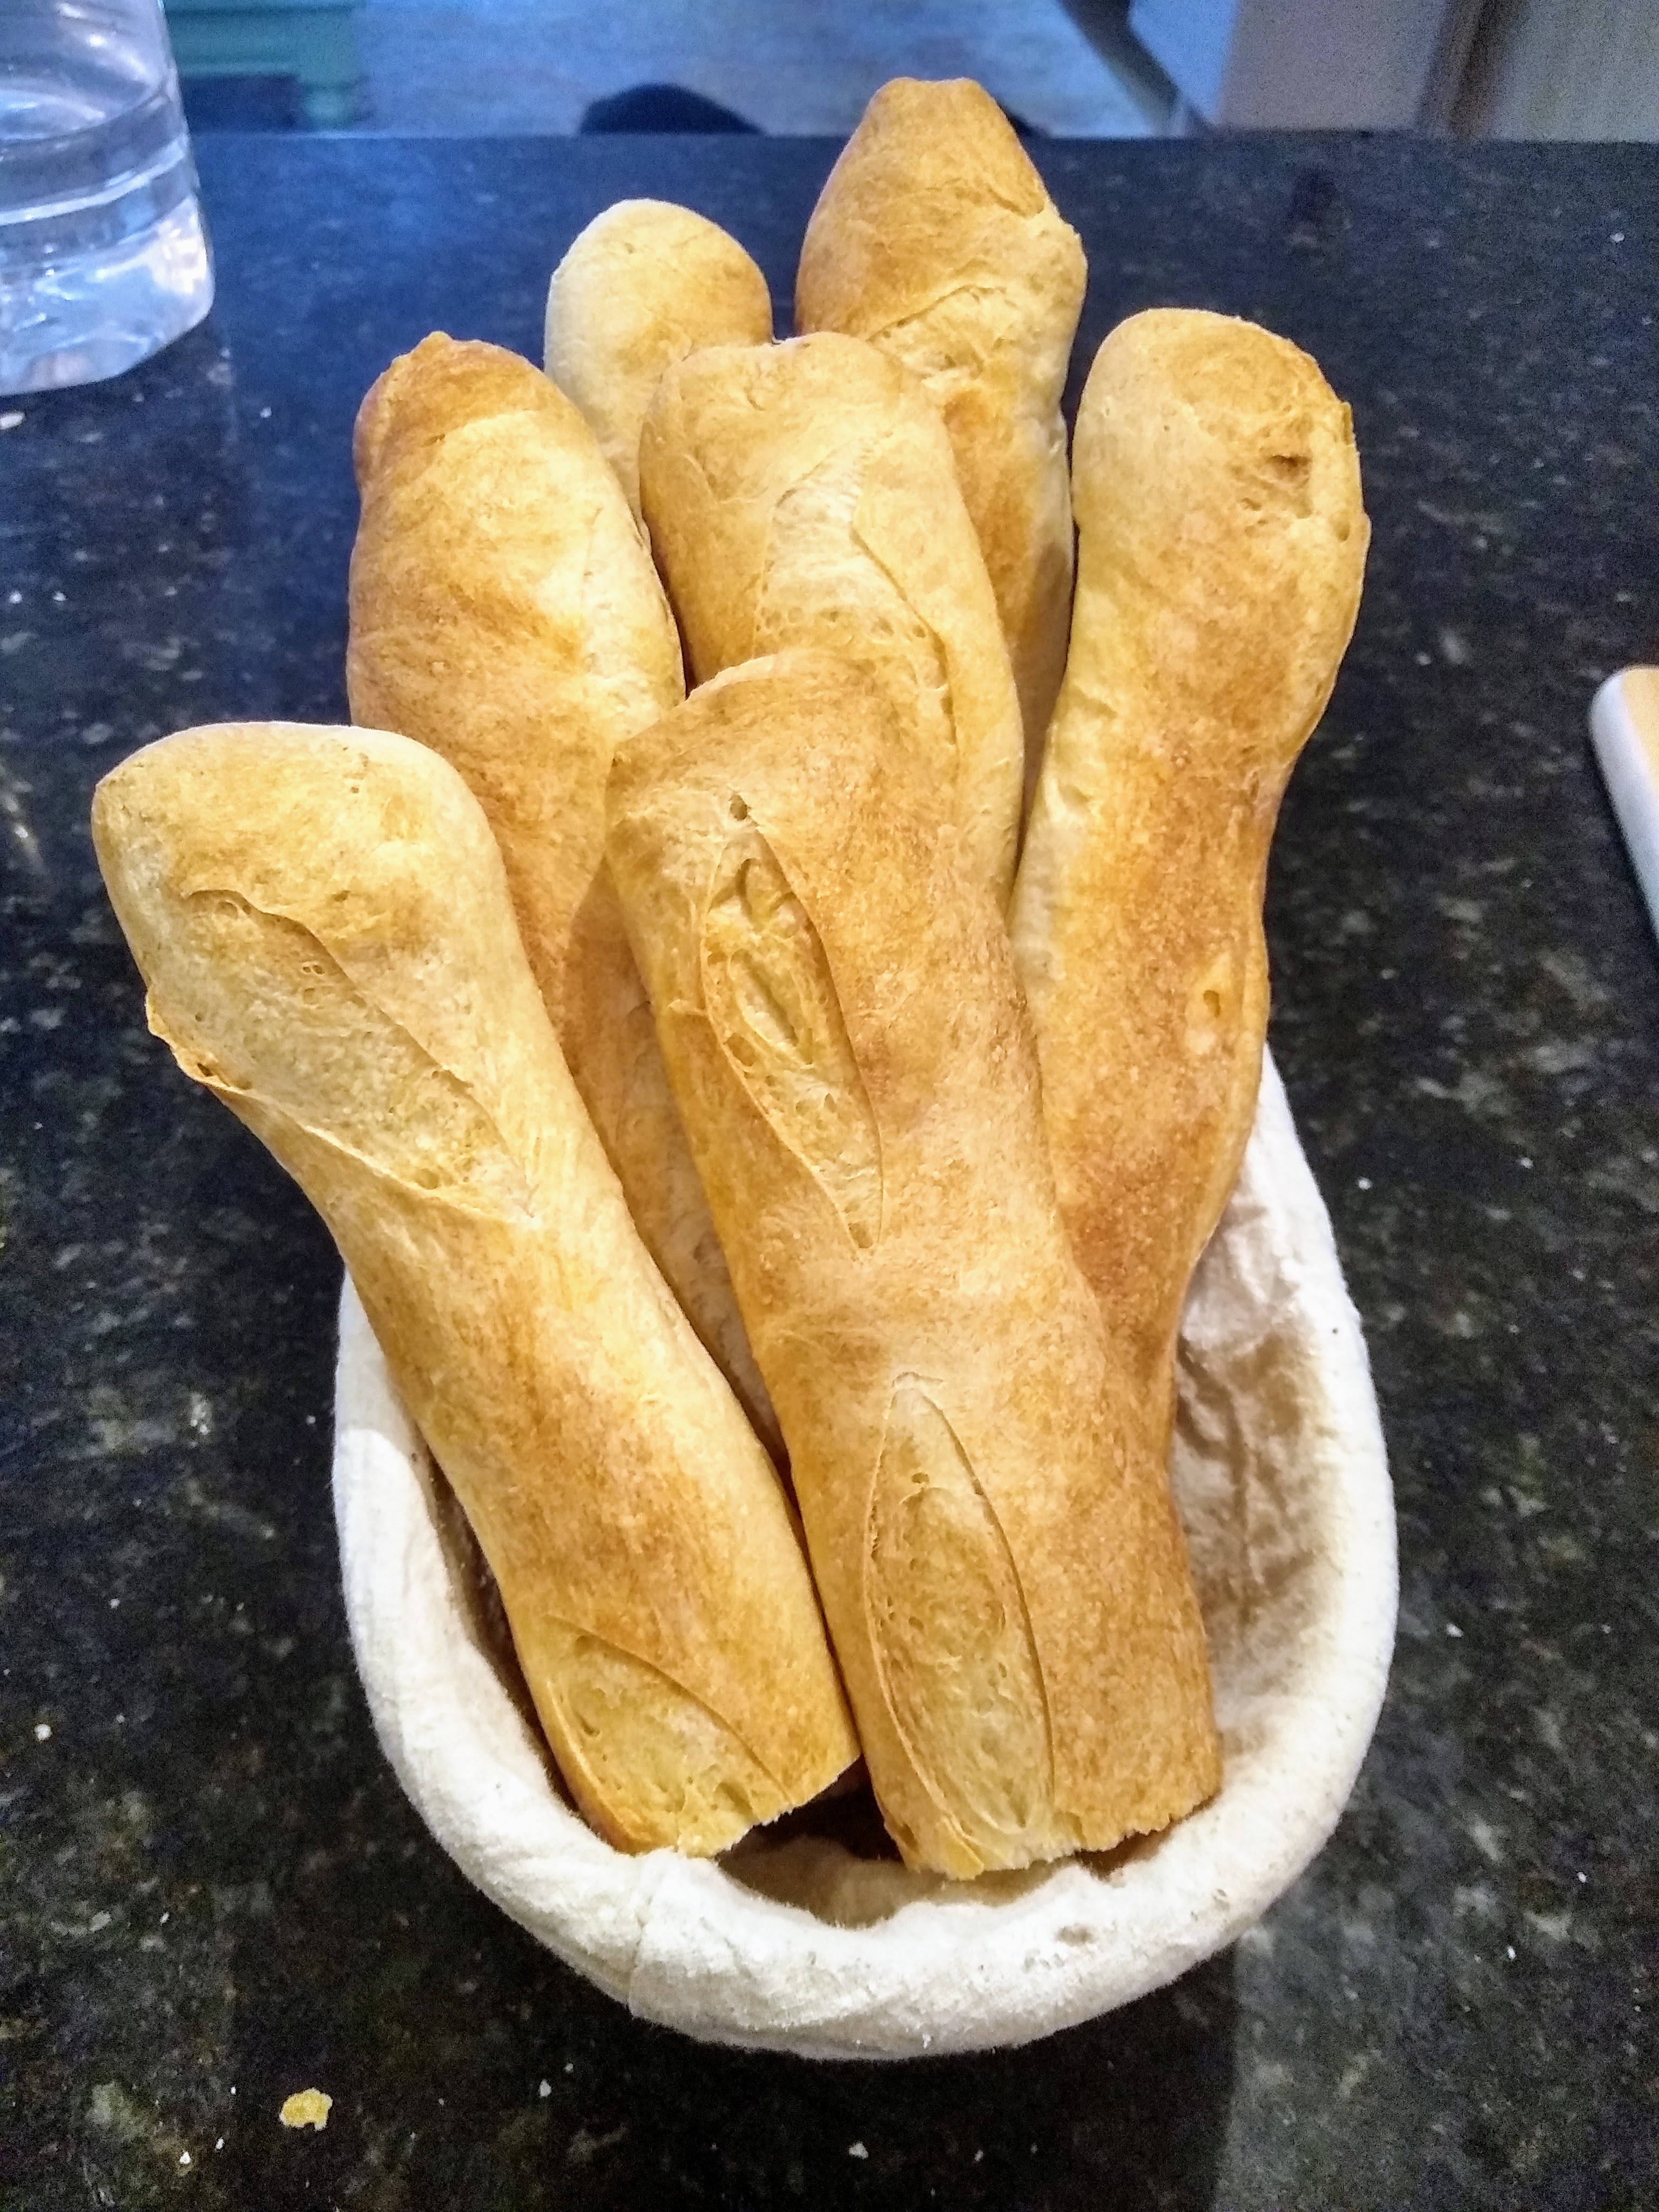 Completed french bread